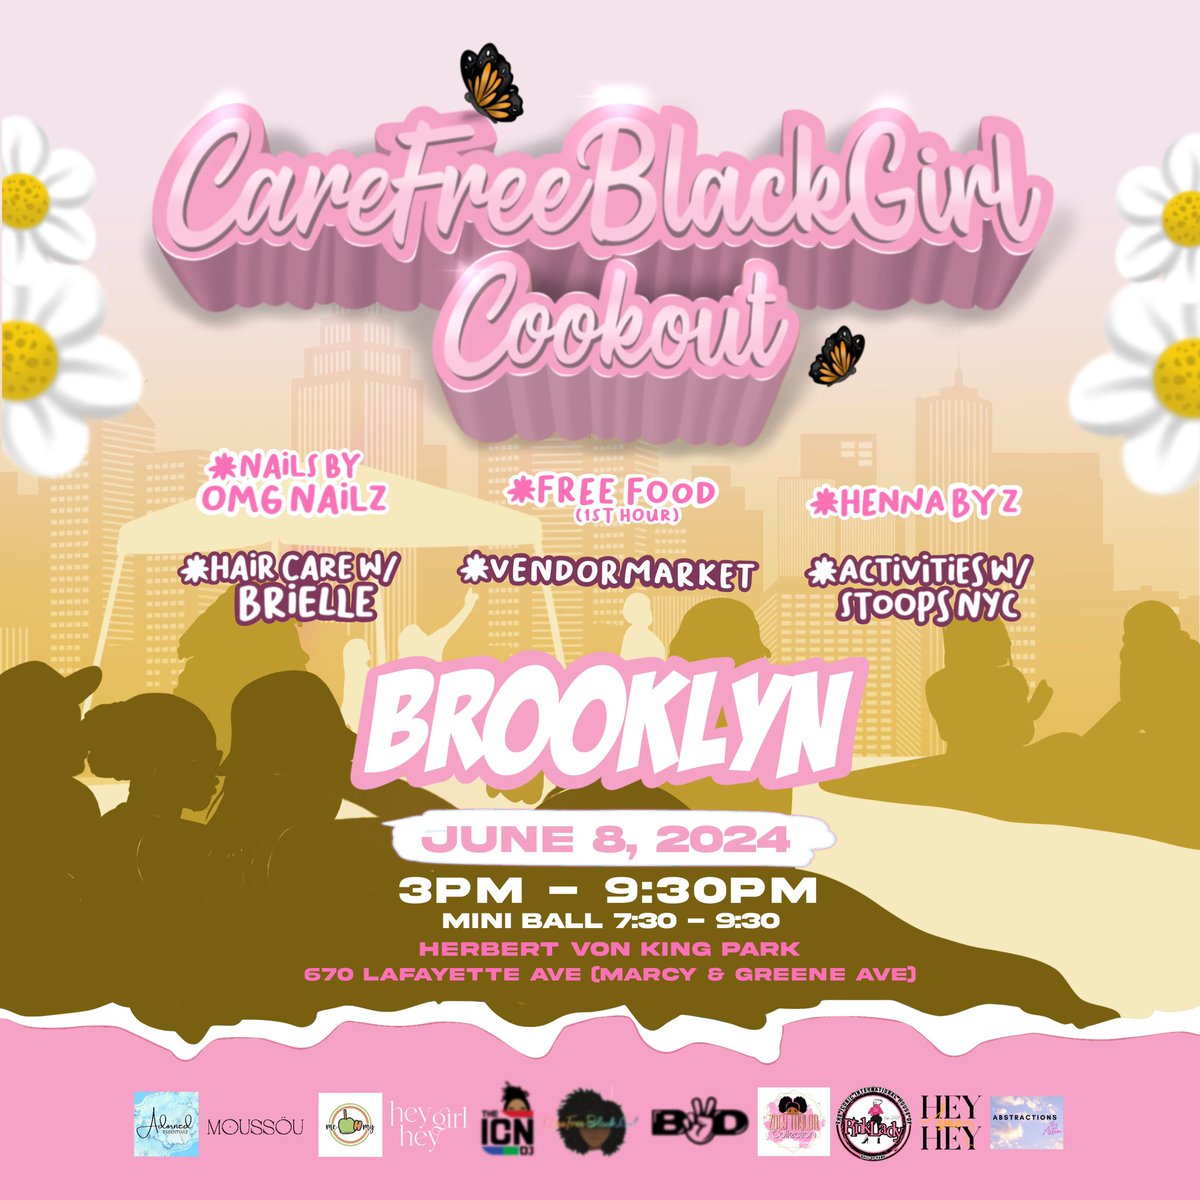 Brooklyn 🗣️🗣️🗣️
CareFreeBlackGirl CookOut !! June 8th 📍📍
Location : Herbert Von king park 
Time - 3pm -9:30 
what to expect 
•black women DJs , performers & host 
•vendor market 
•glam bar - braids , lashes , makeup

Plus Free Mini Ball ( After 7:30) w/ cash prizes to